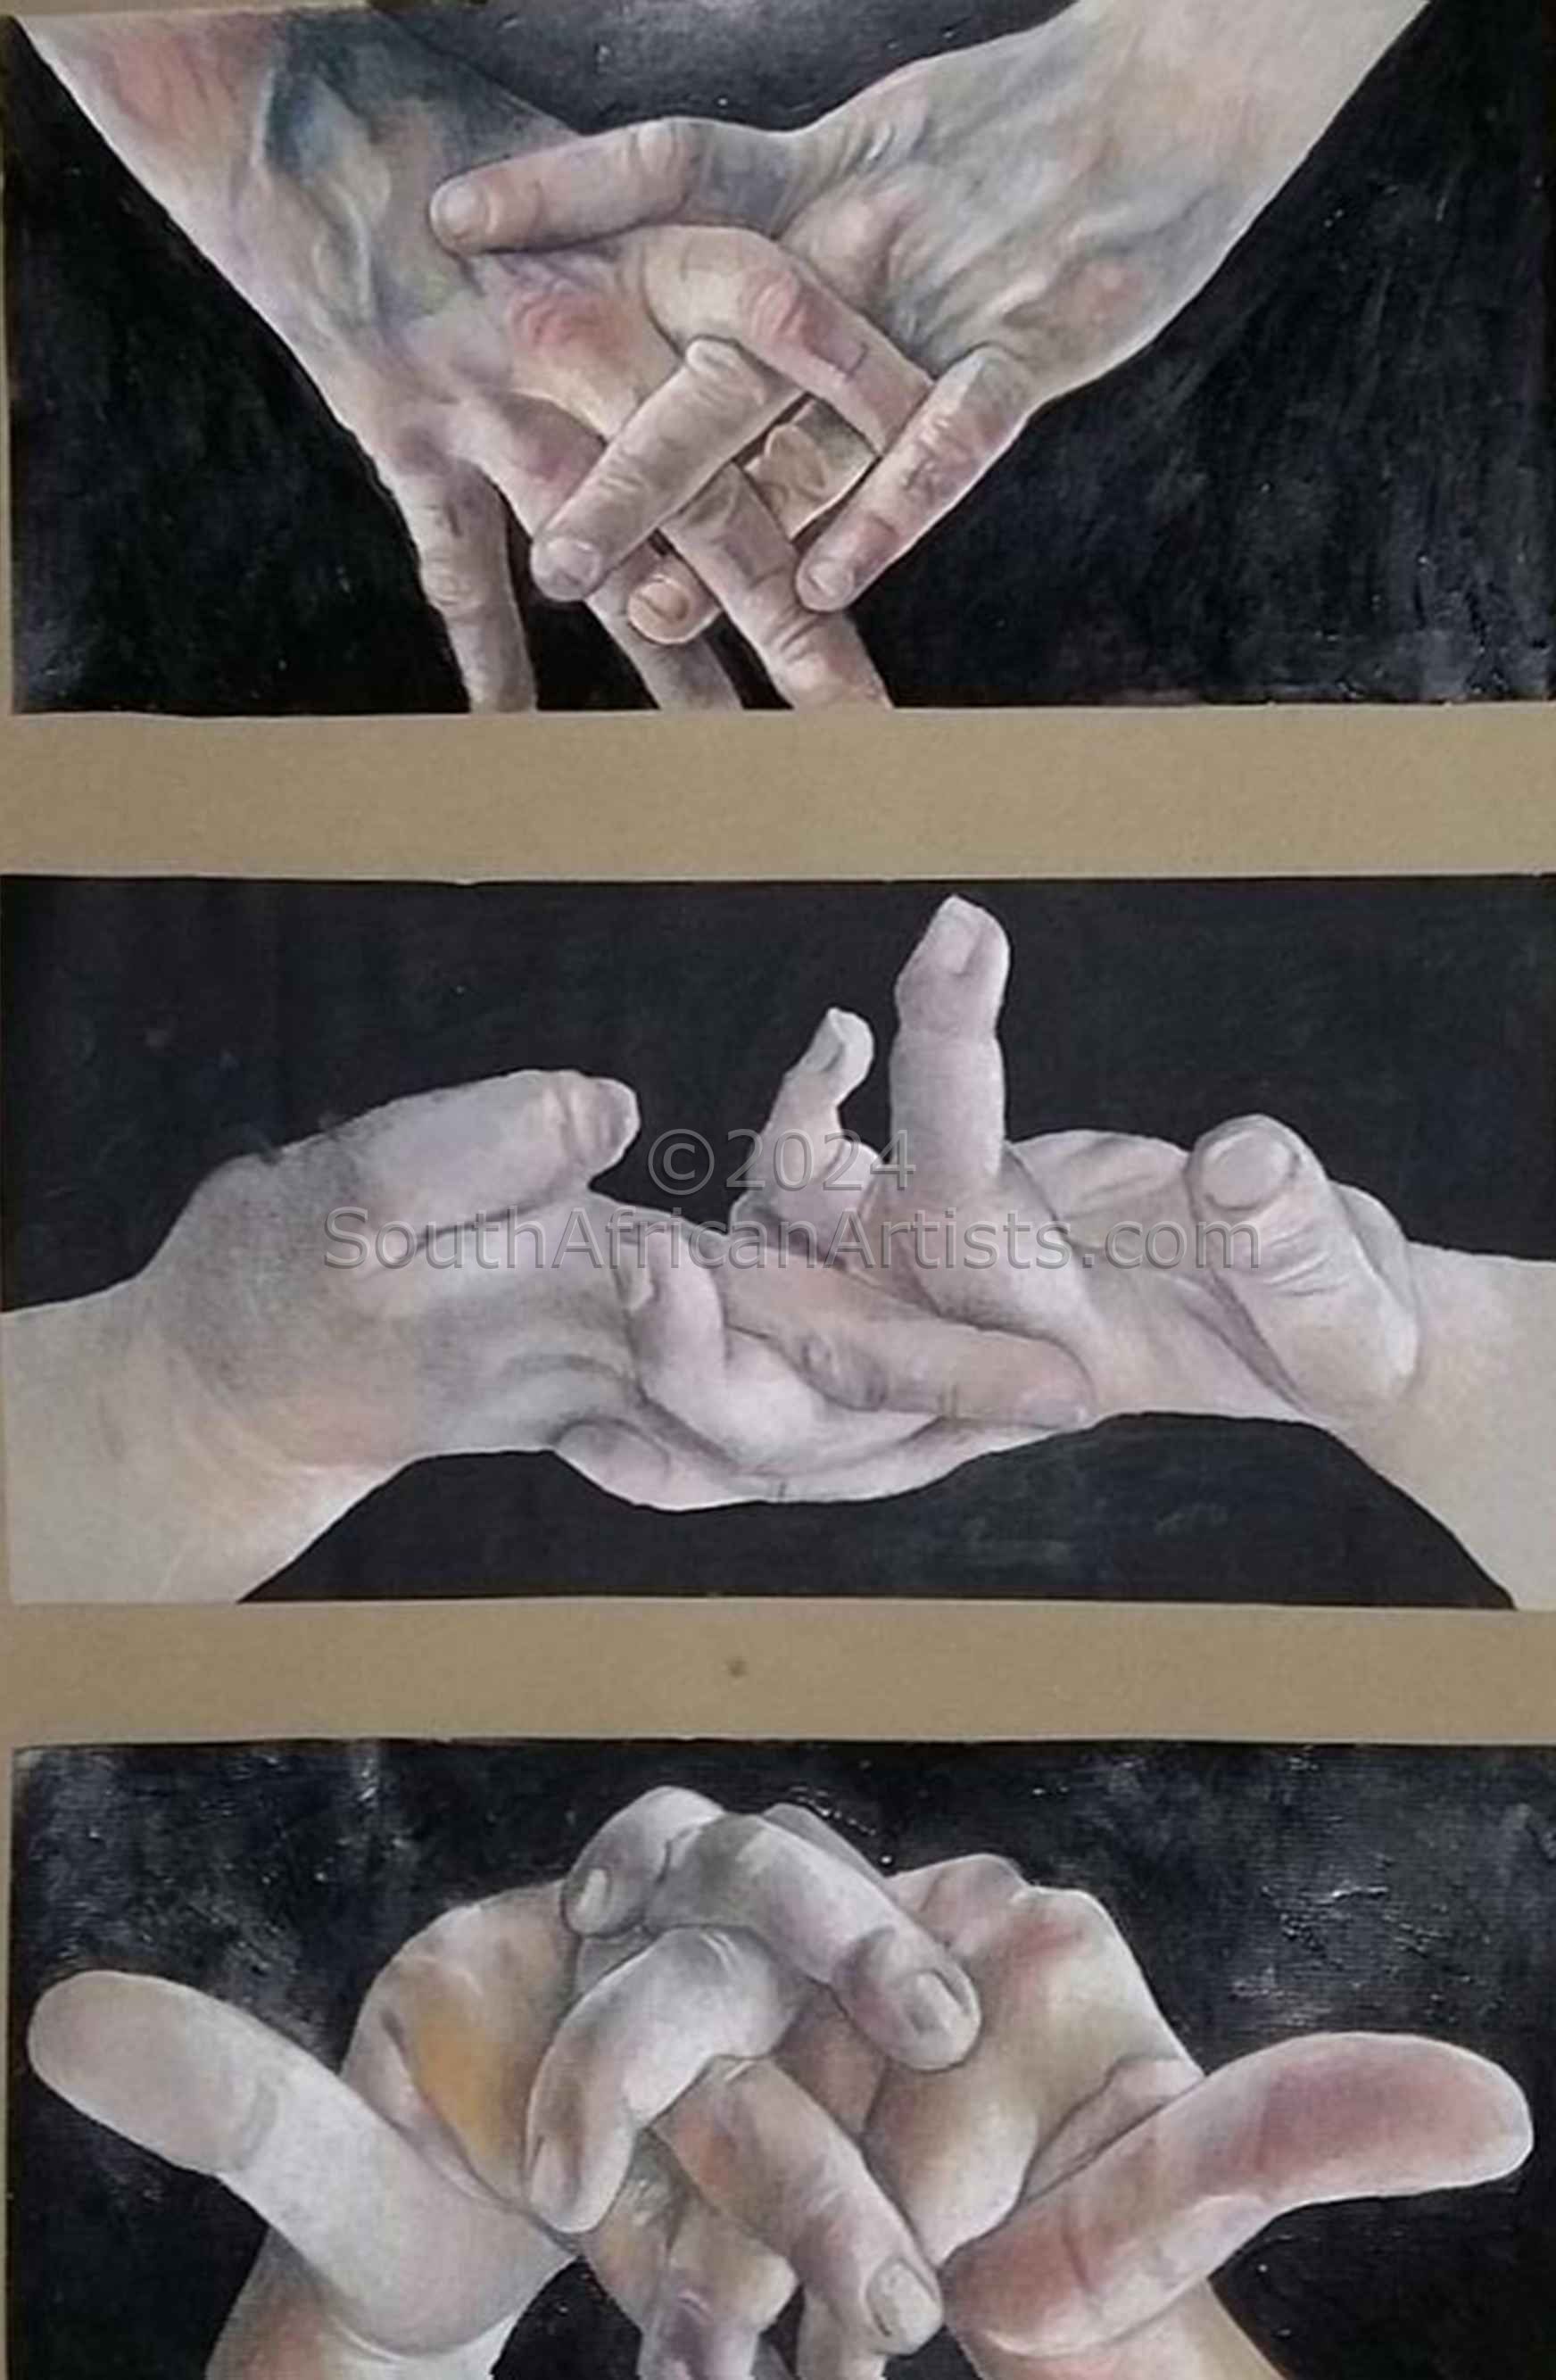 These Are the Hands That Make the Art